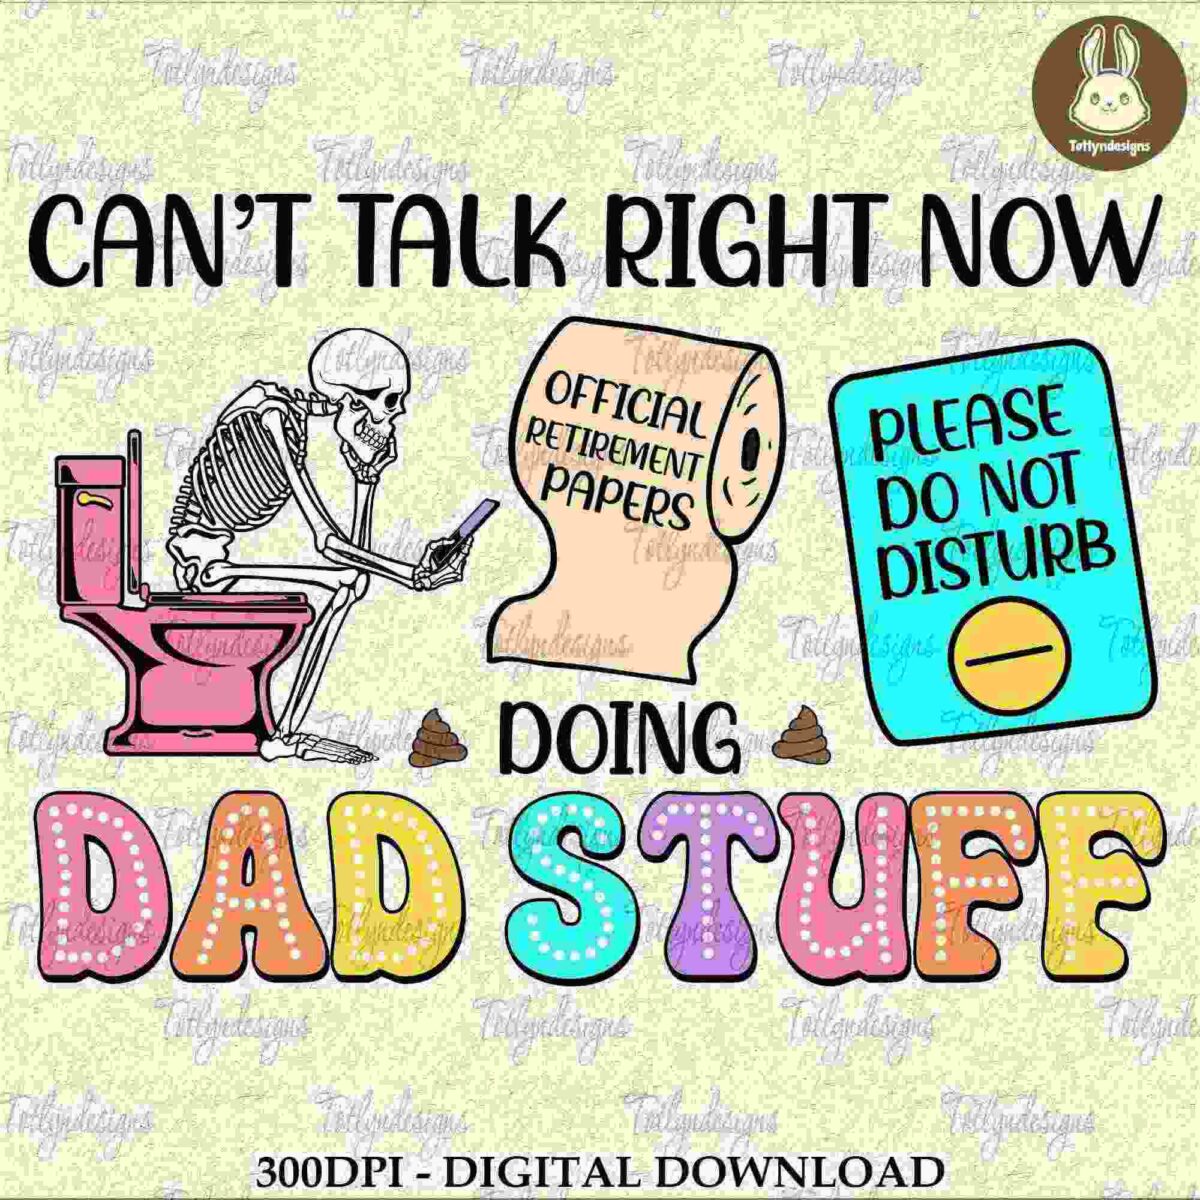 A cartoon illustration features a skeleton reading "Official Retirement Papers" while sitting on a toilet. A sign near it reads "Please Do Not Disturb." Bold text above says, "Can't talk right now, doing dad stuff.